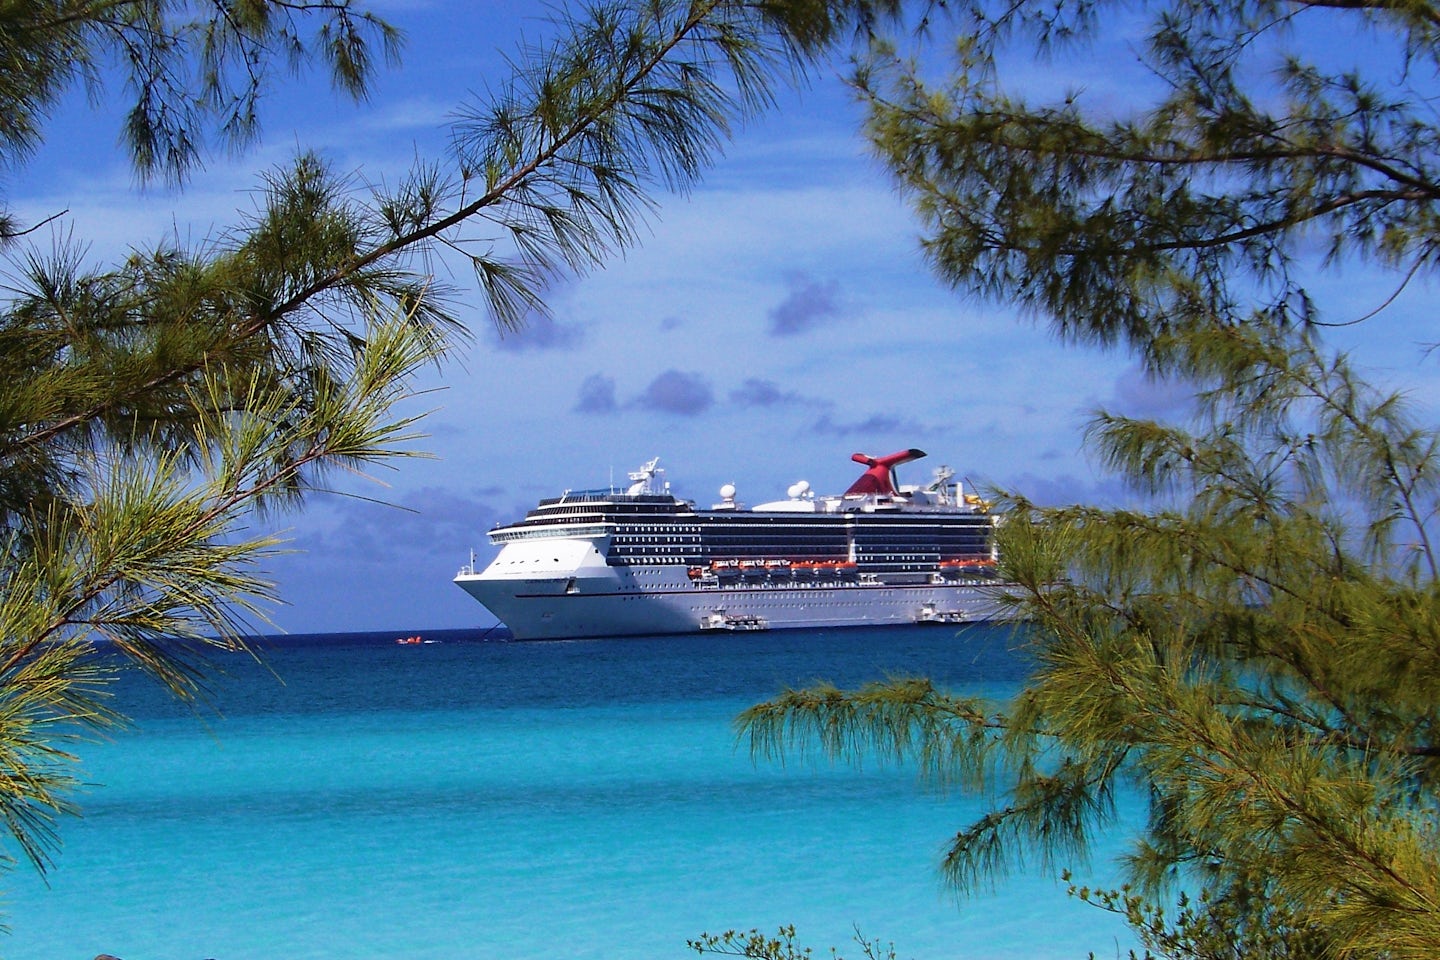 View of the Carnival Pride as we were walking to our beach wedding ceremony